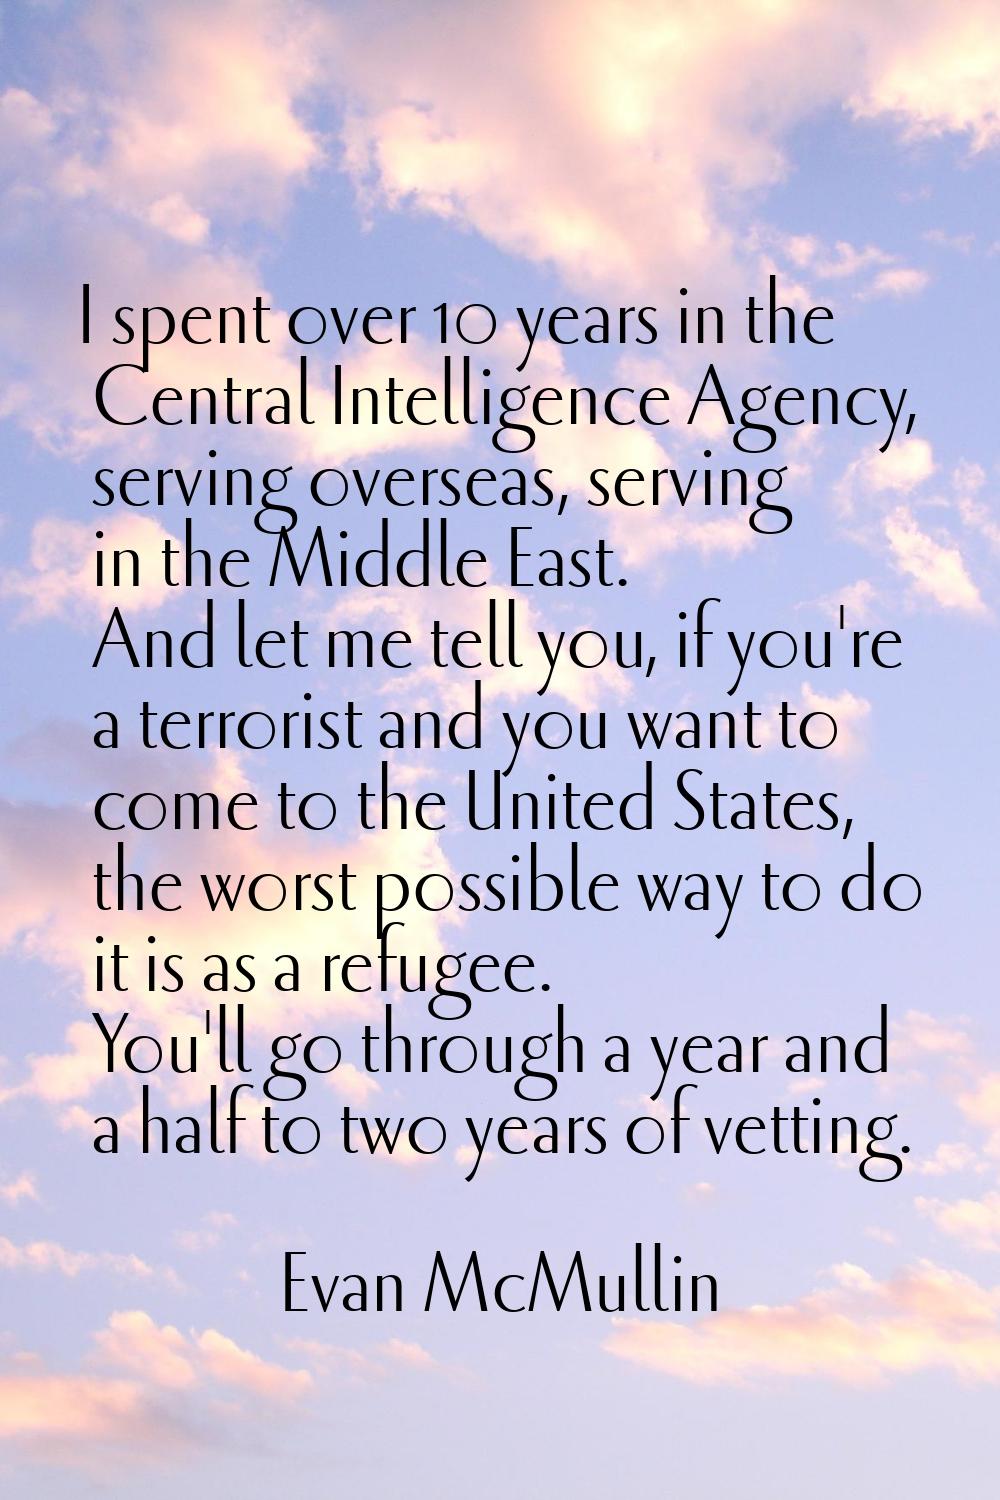 I spent over 10 years in the Central Intelligence Agency, serving overseas, serving in the Middle E